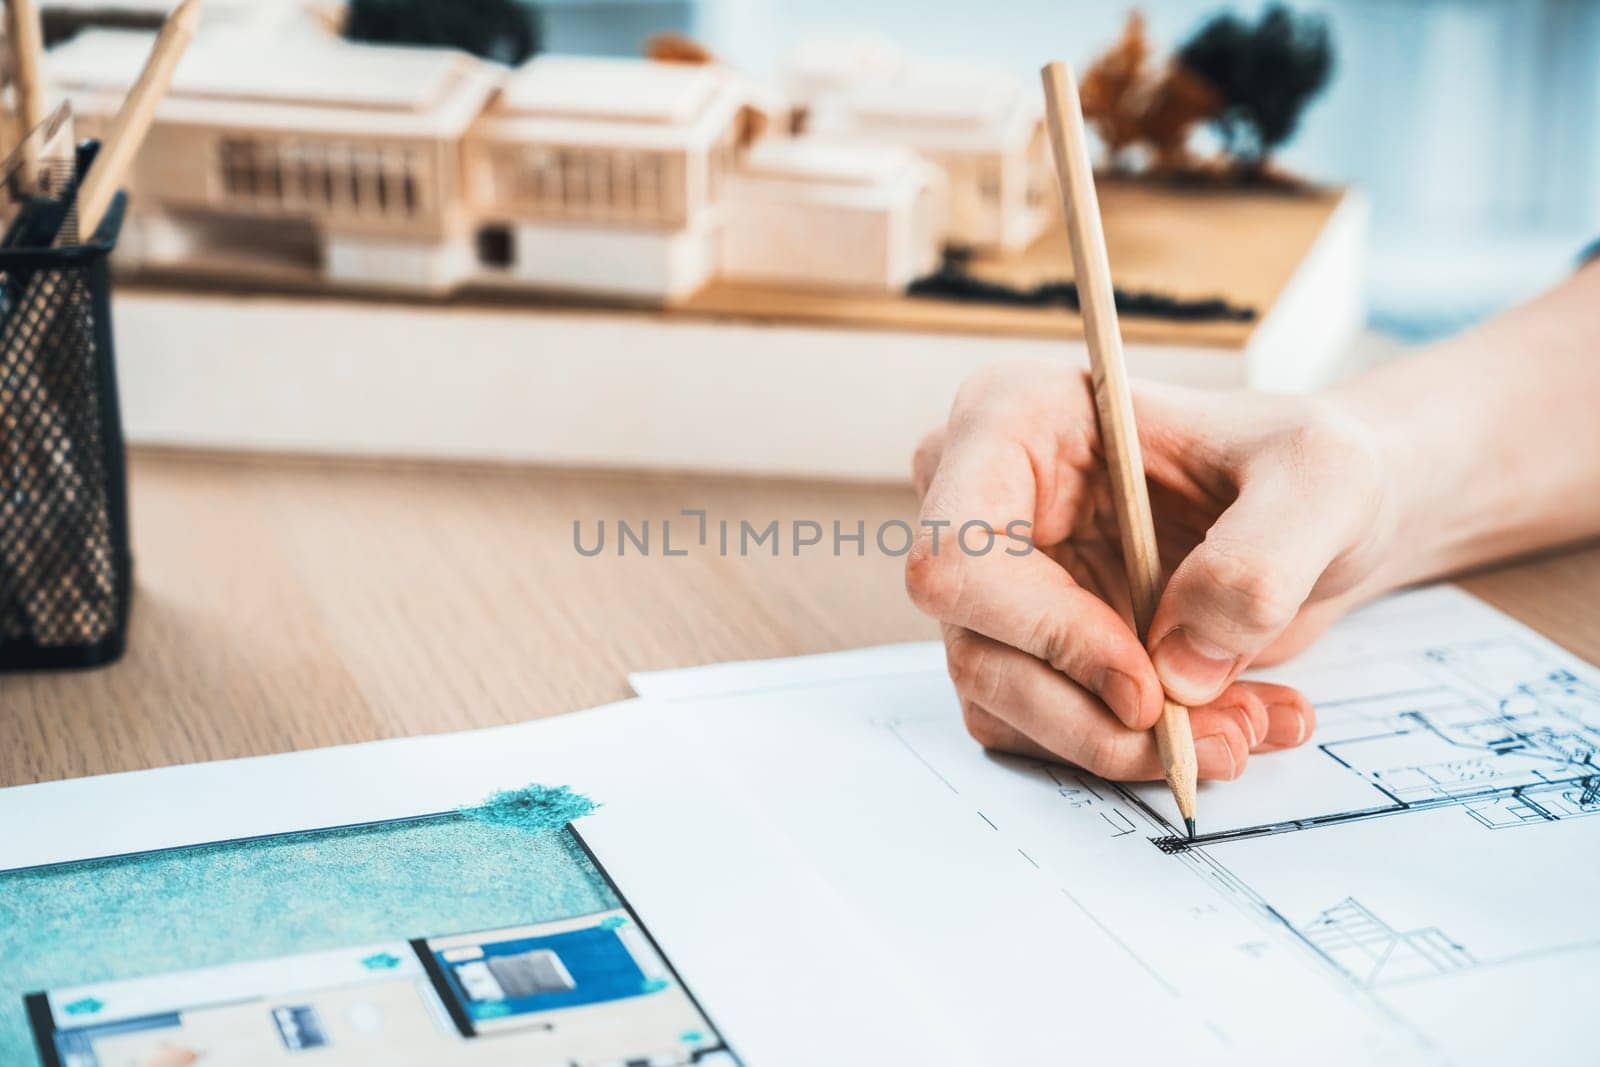 Closeup hand drafting interior house design by architect designer planning home layout on blueprint paper on office desk. Architect carefully draw home interior layout with pencil and tool. Iteration